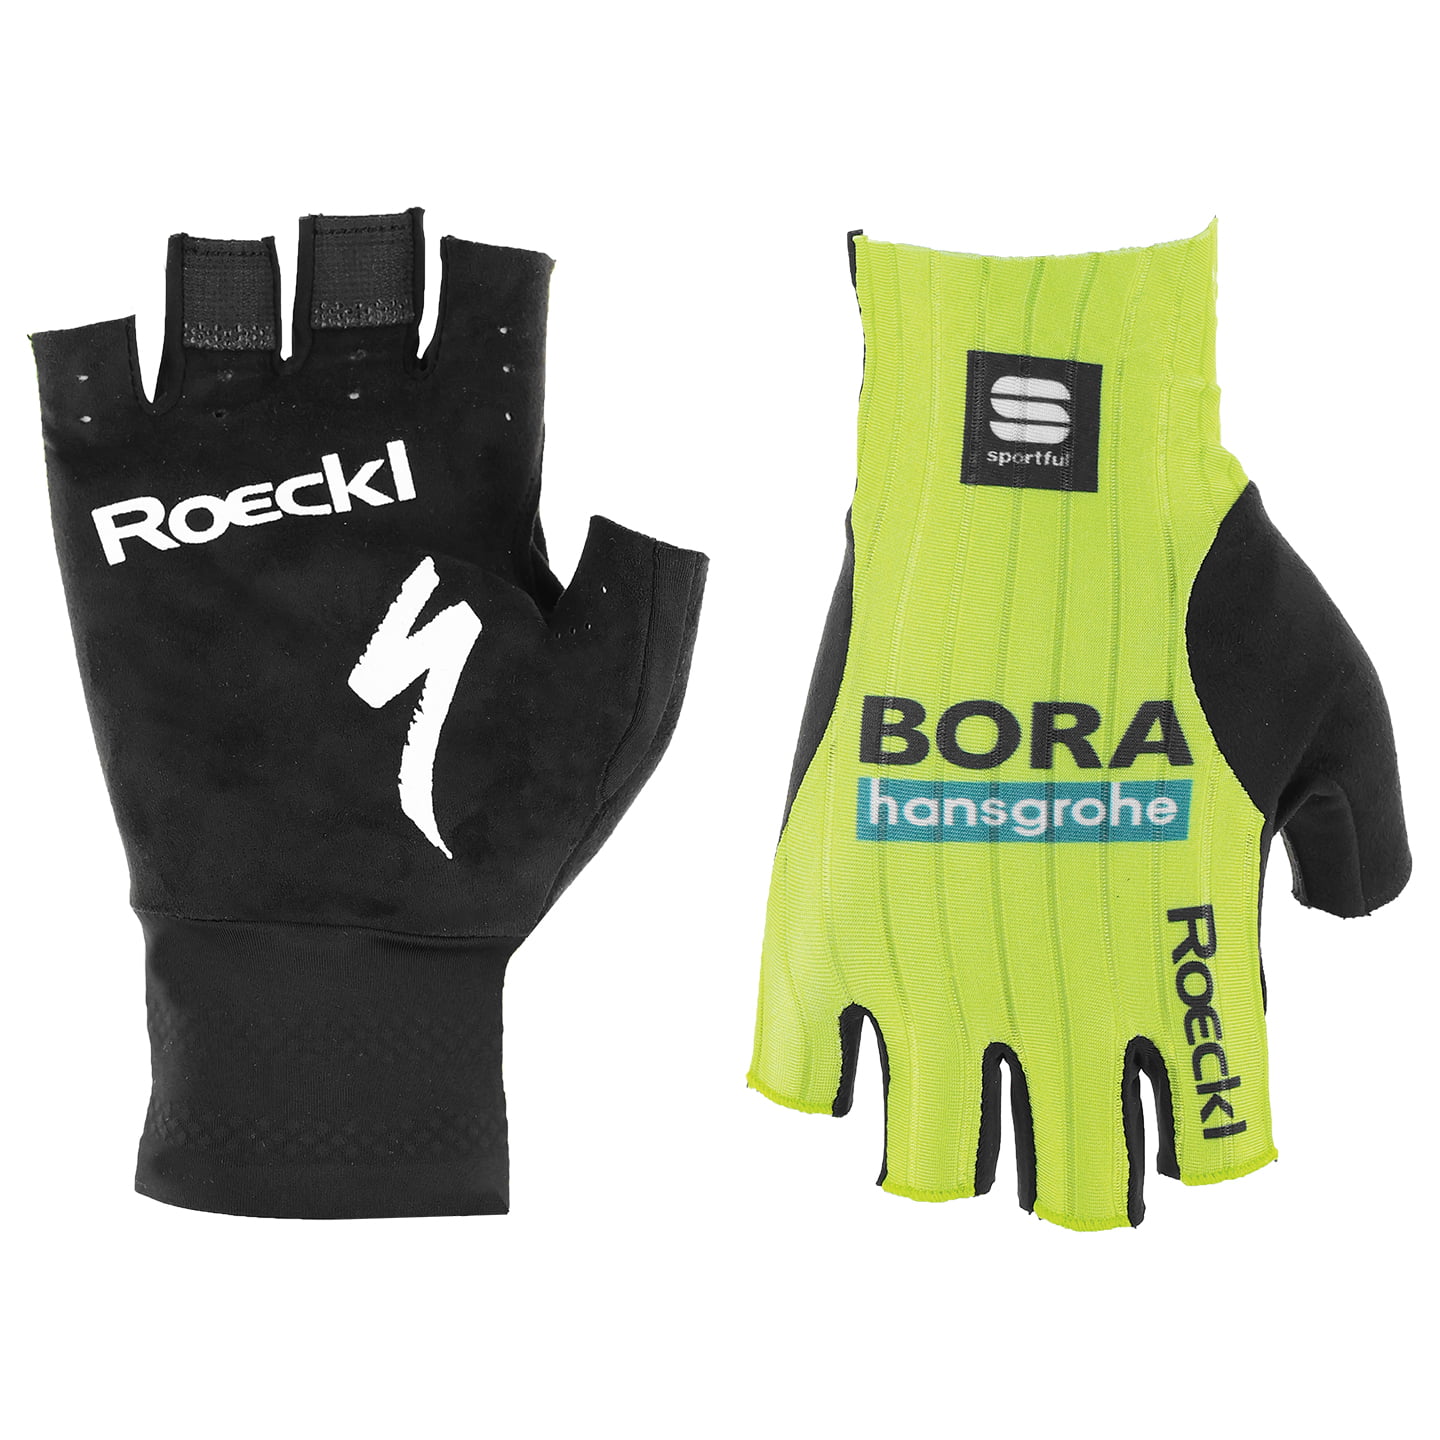 BORA-hansgrohe 2024 Cycling Gloves, for men, size 8, Cycle gloves, Cycle clothes